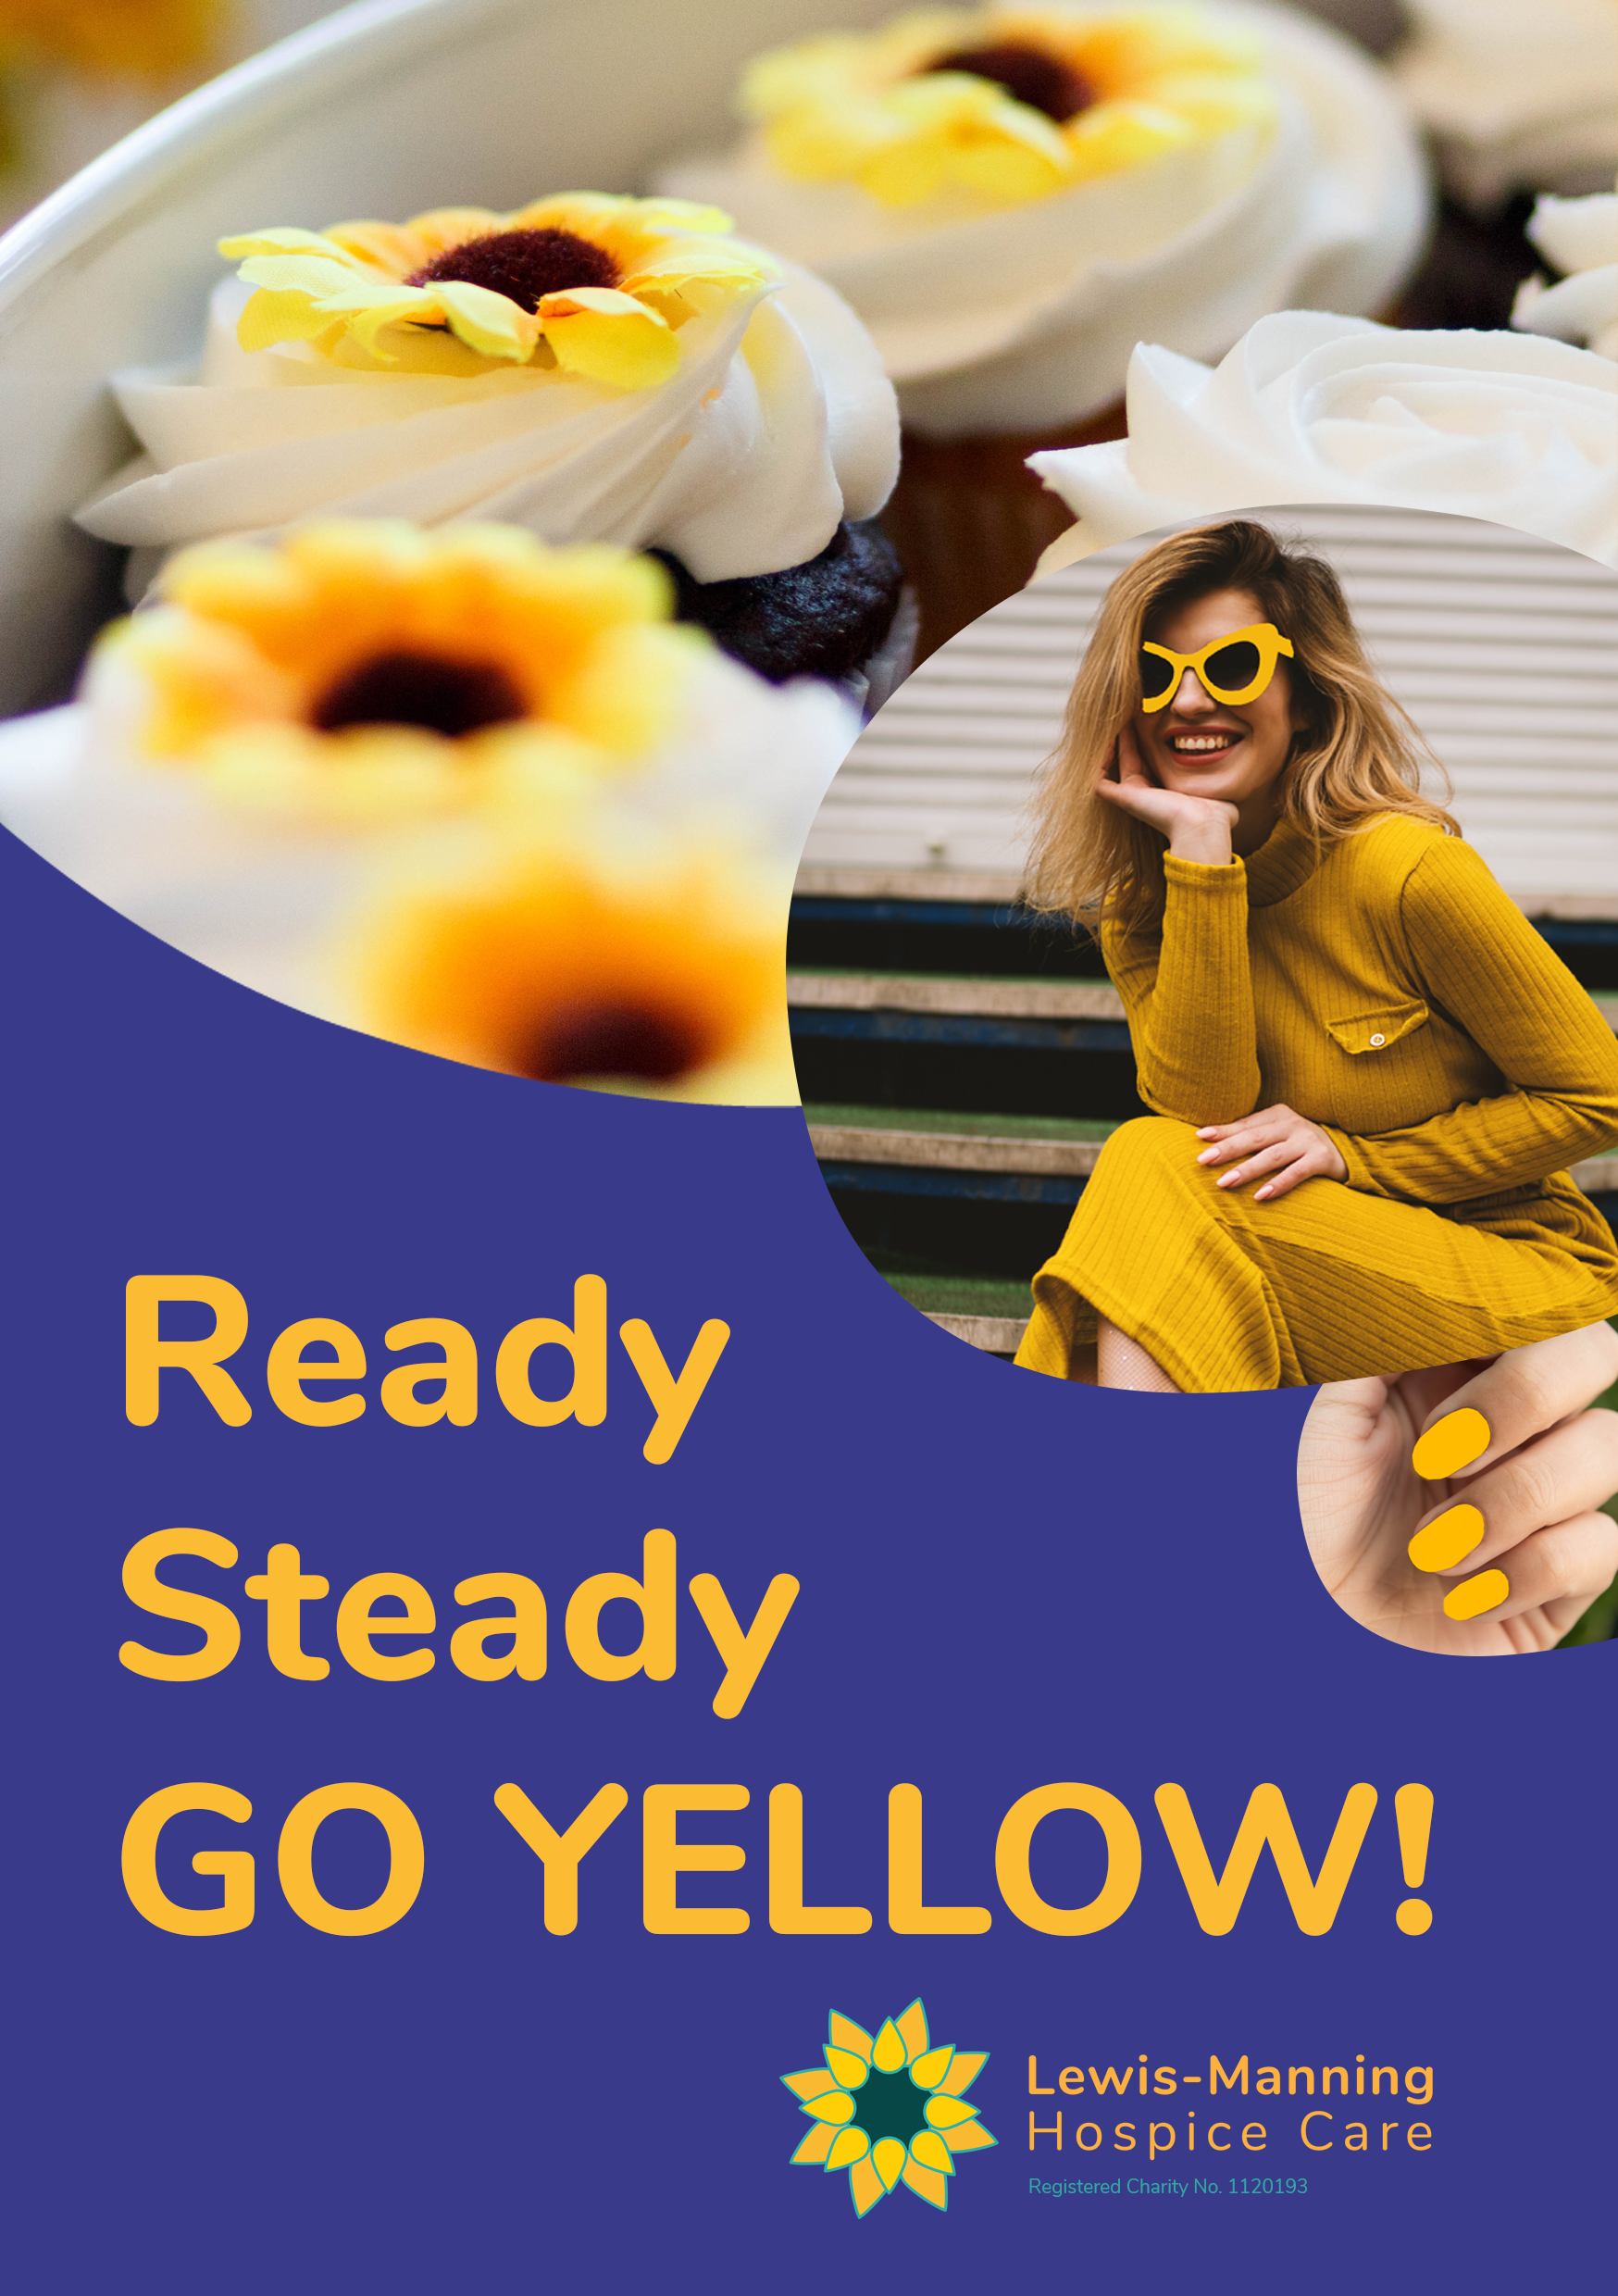 Could you join Lewis-Manning Hospice Care and ‘Go Yellow’ during Hospice Care Week?